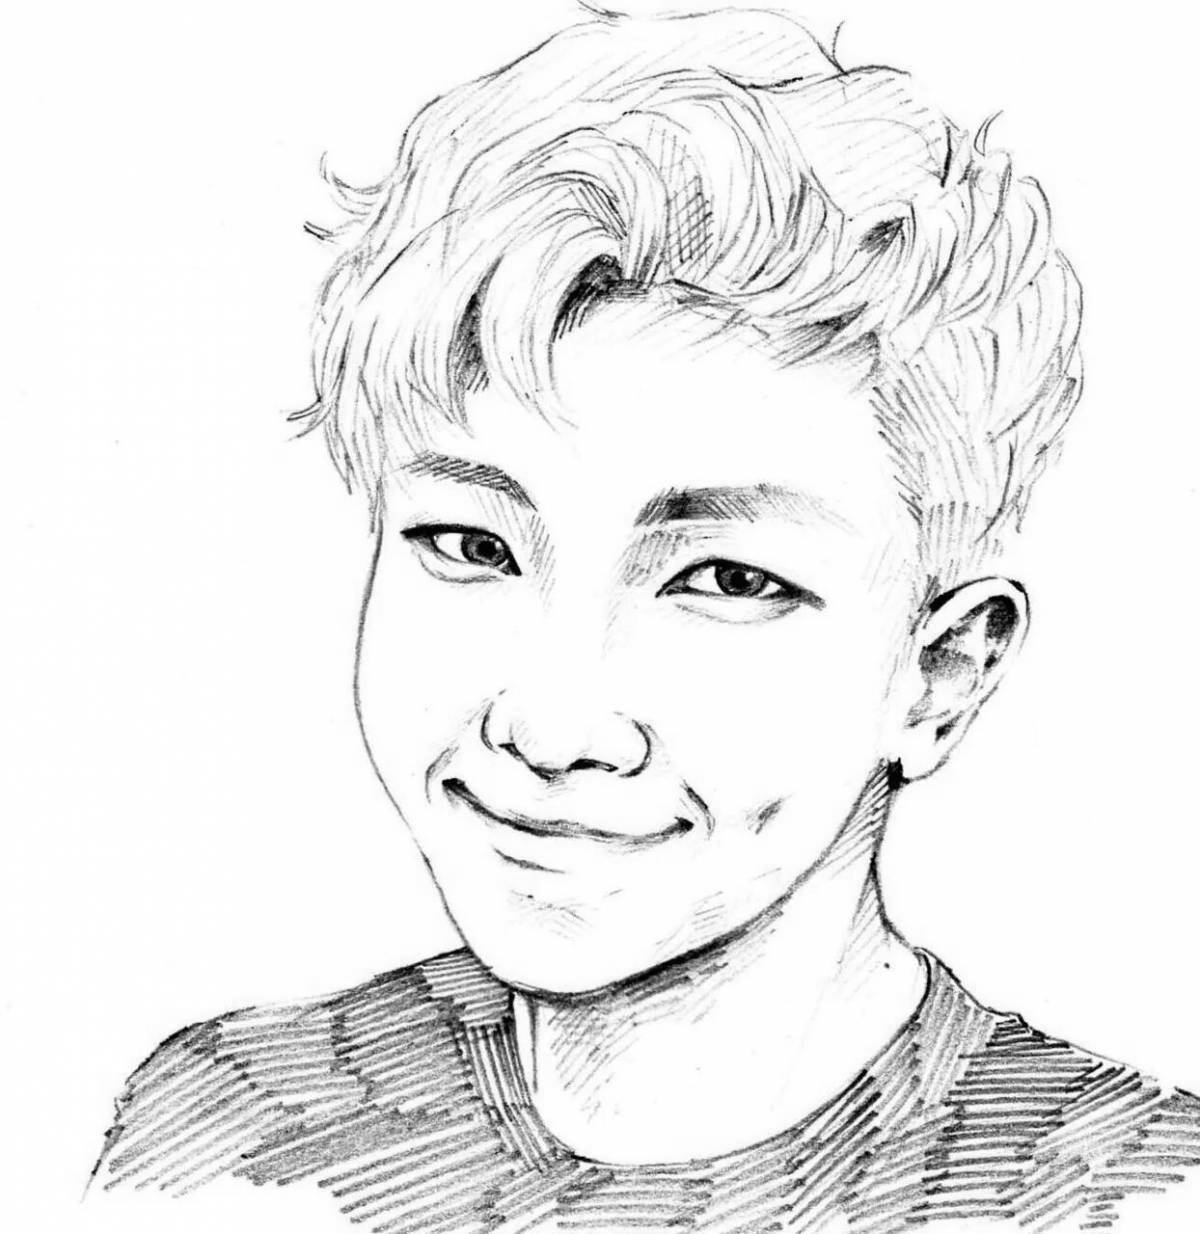 Namjoon's colorful coloring page